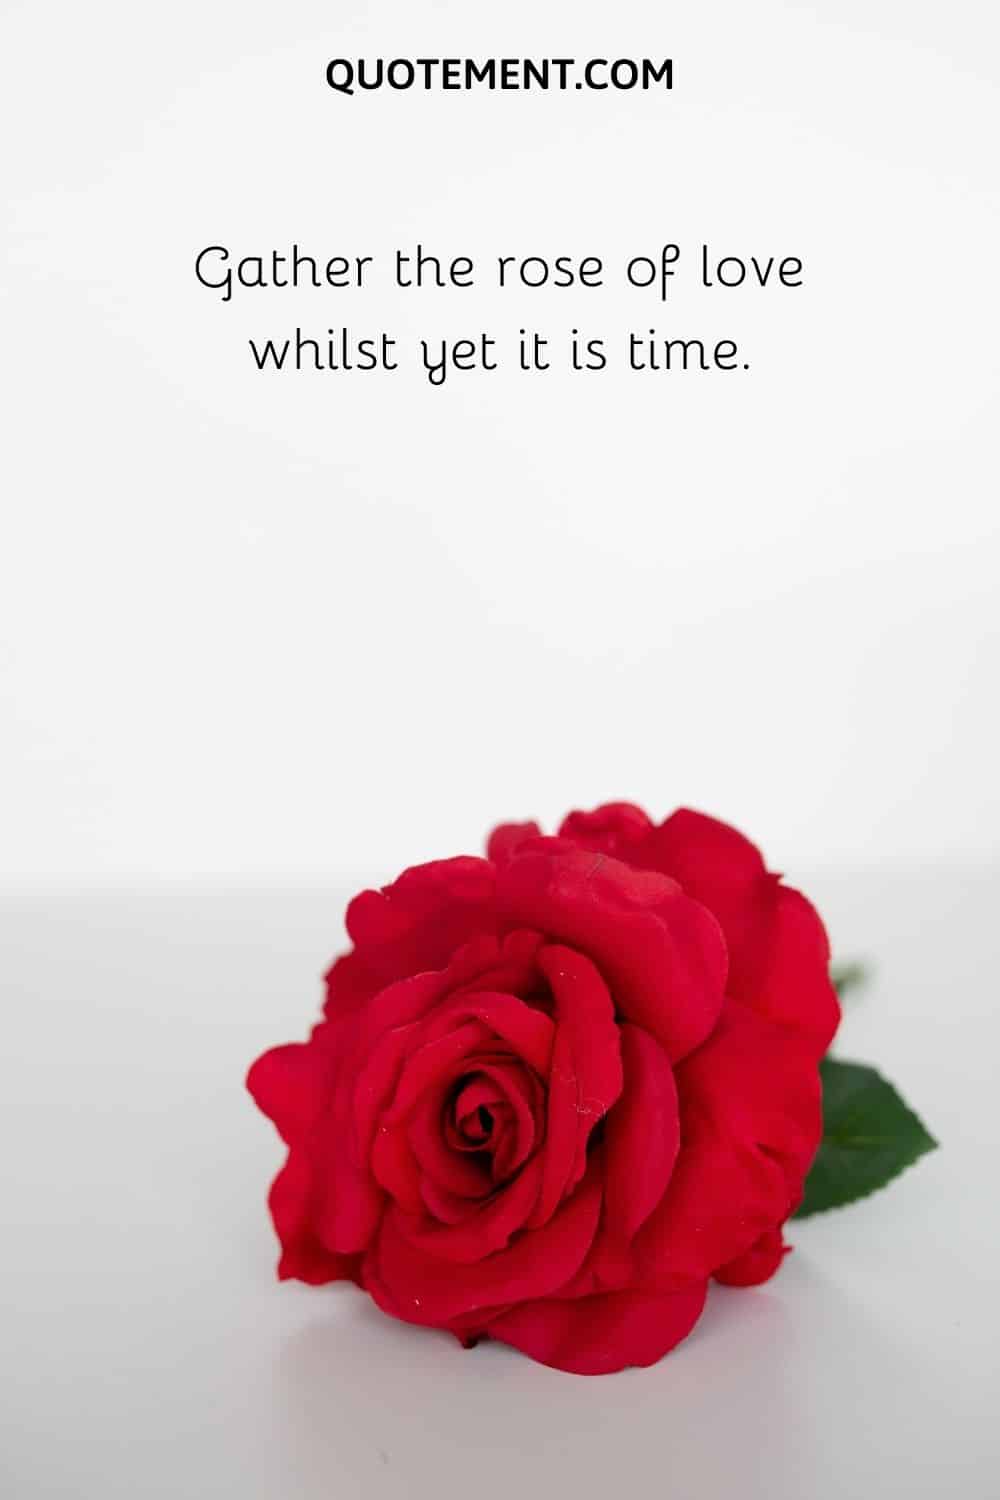 Gather the rose of love whilst yet it is time.